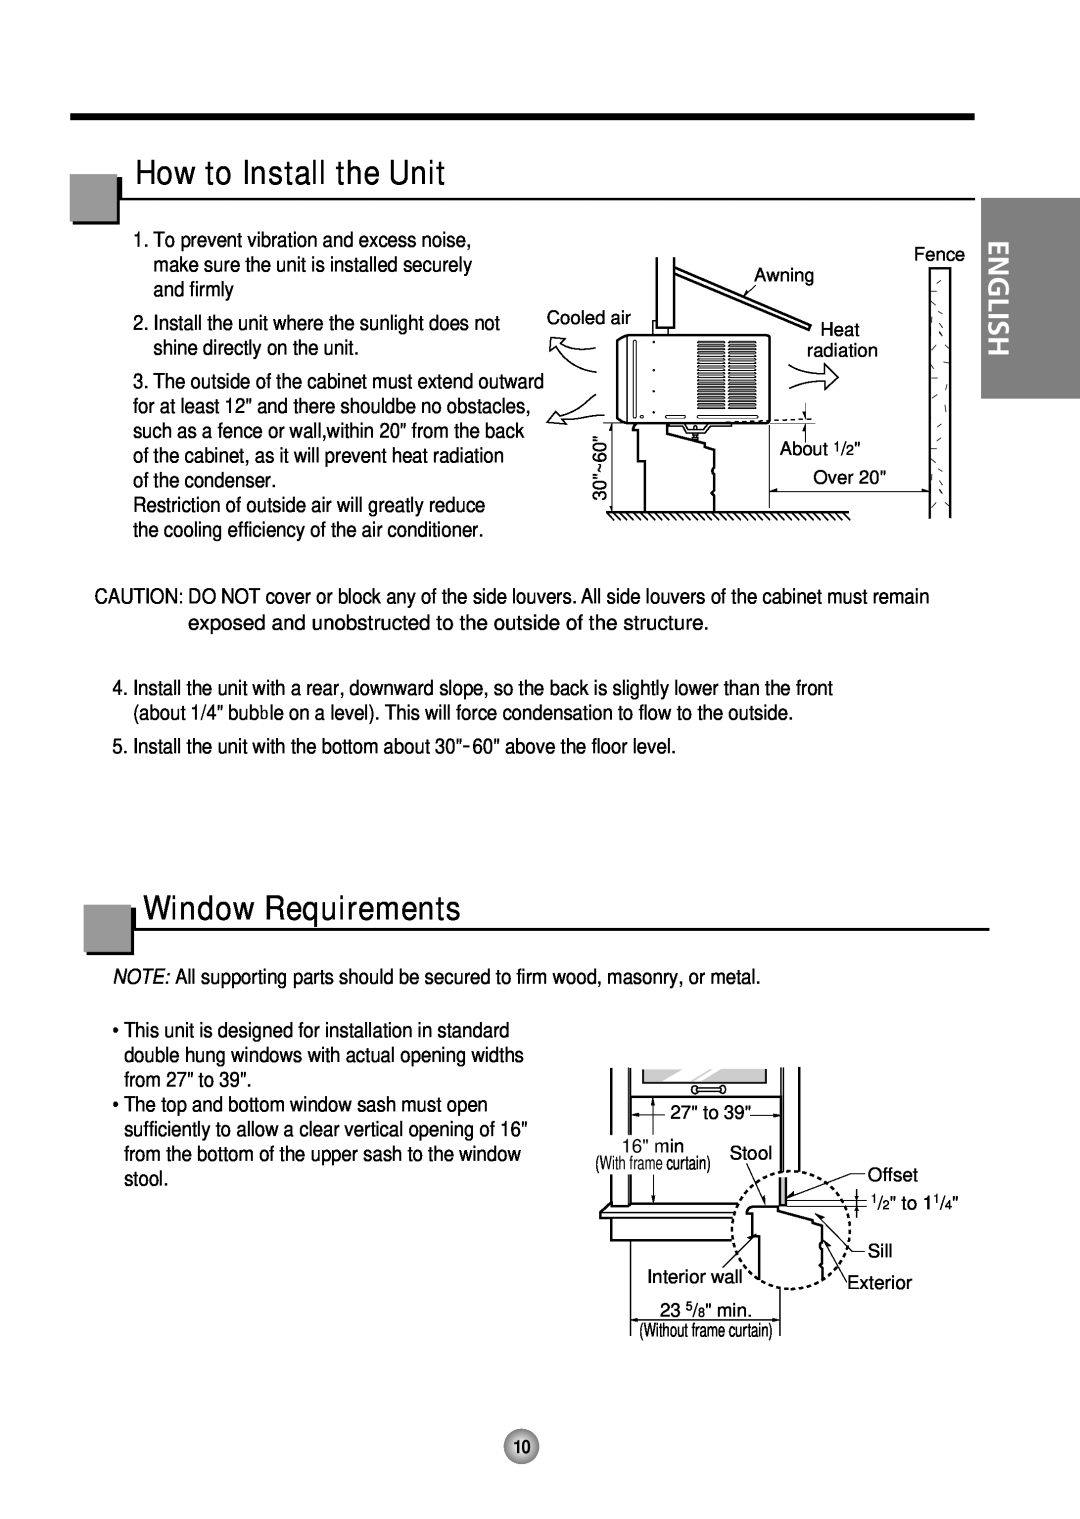 Friedrich CP10, CP12 manual How to Install the Unit, Window Requirements, English 